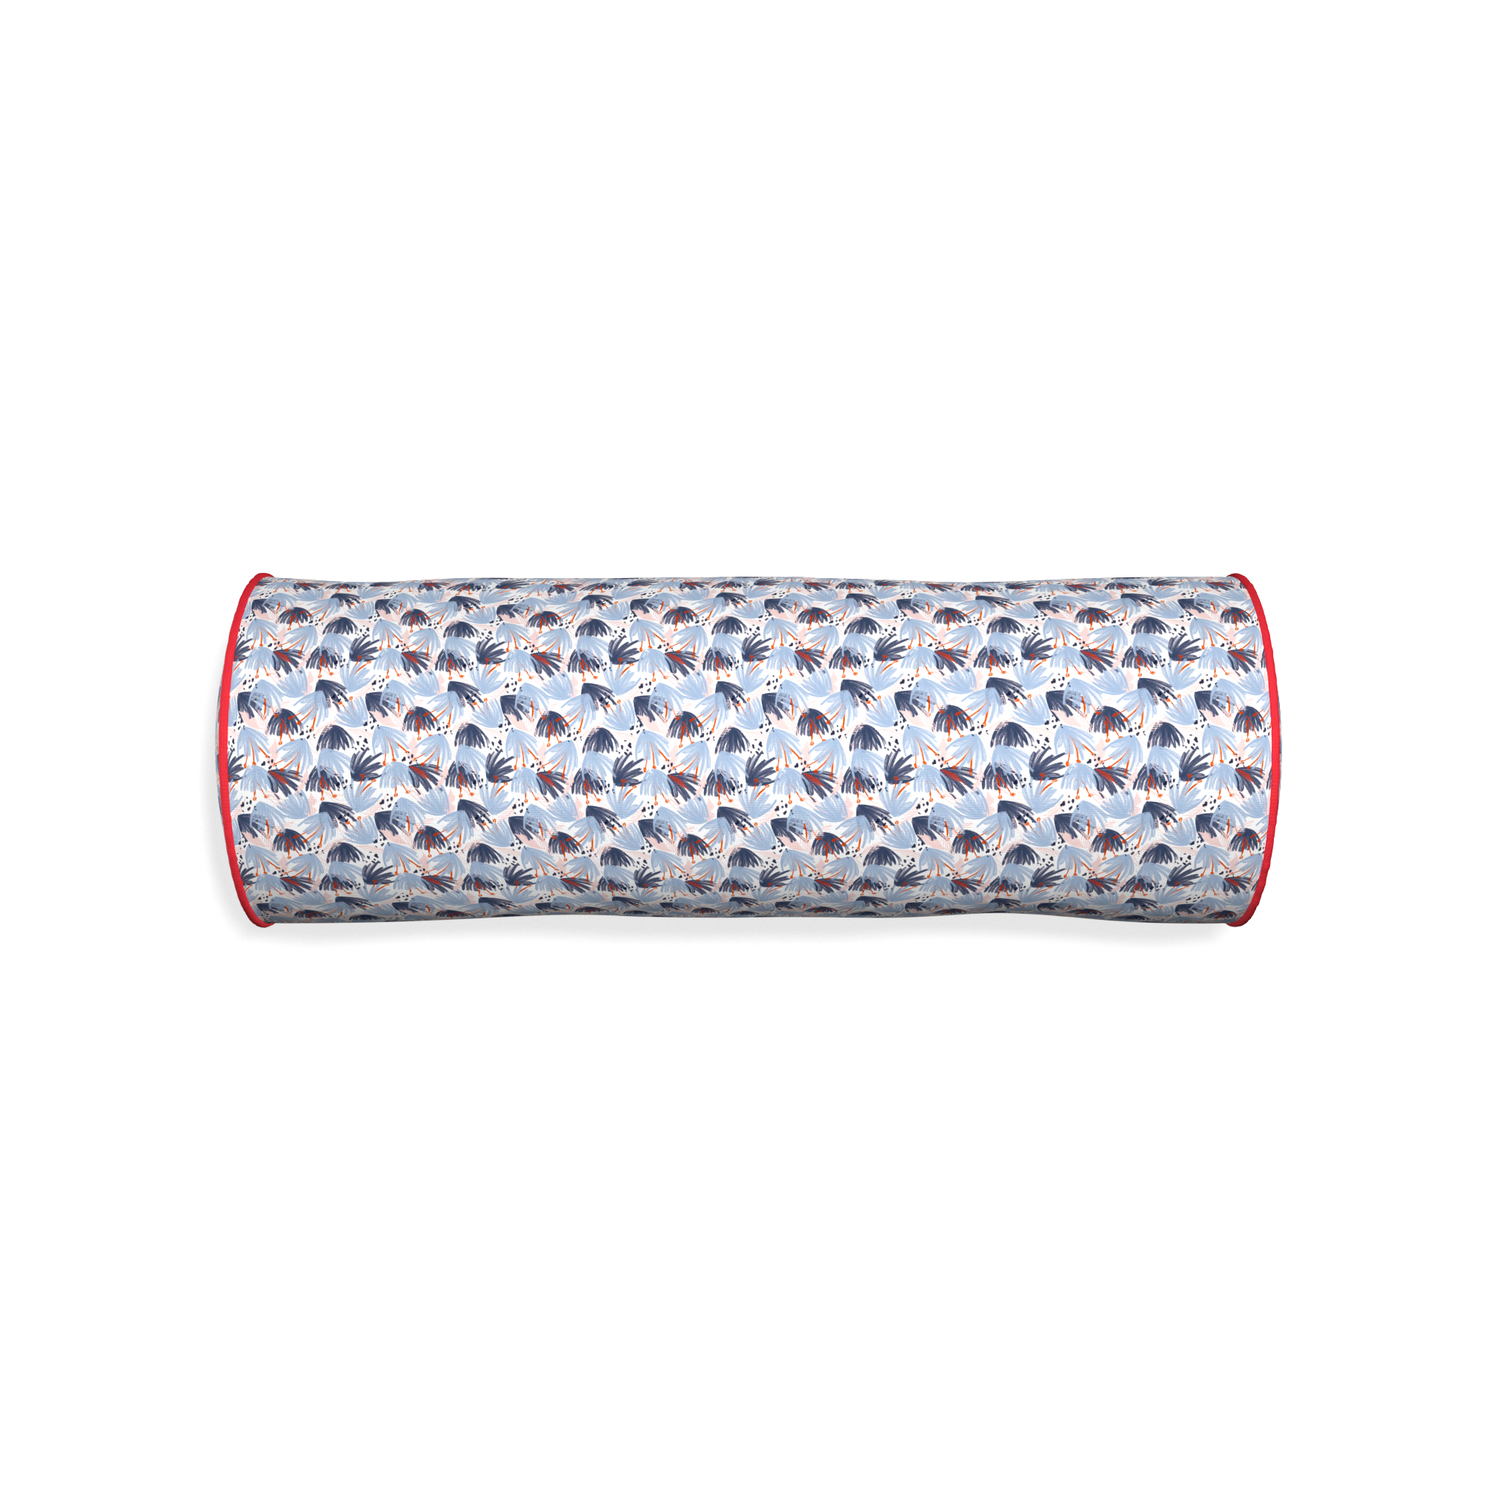 Bolster eden blue custom red and bluepillow with cherry piping on white background